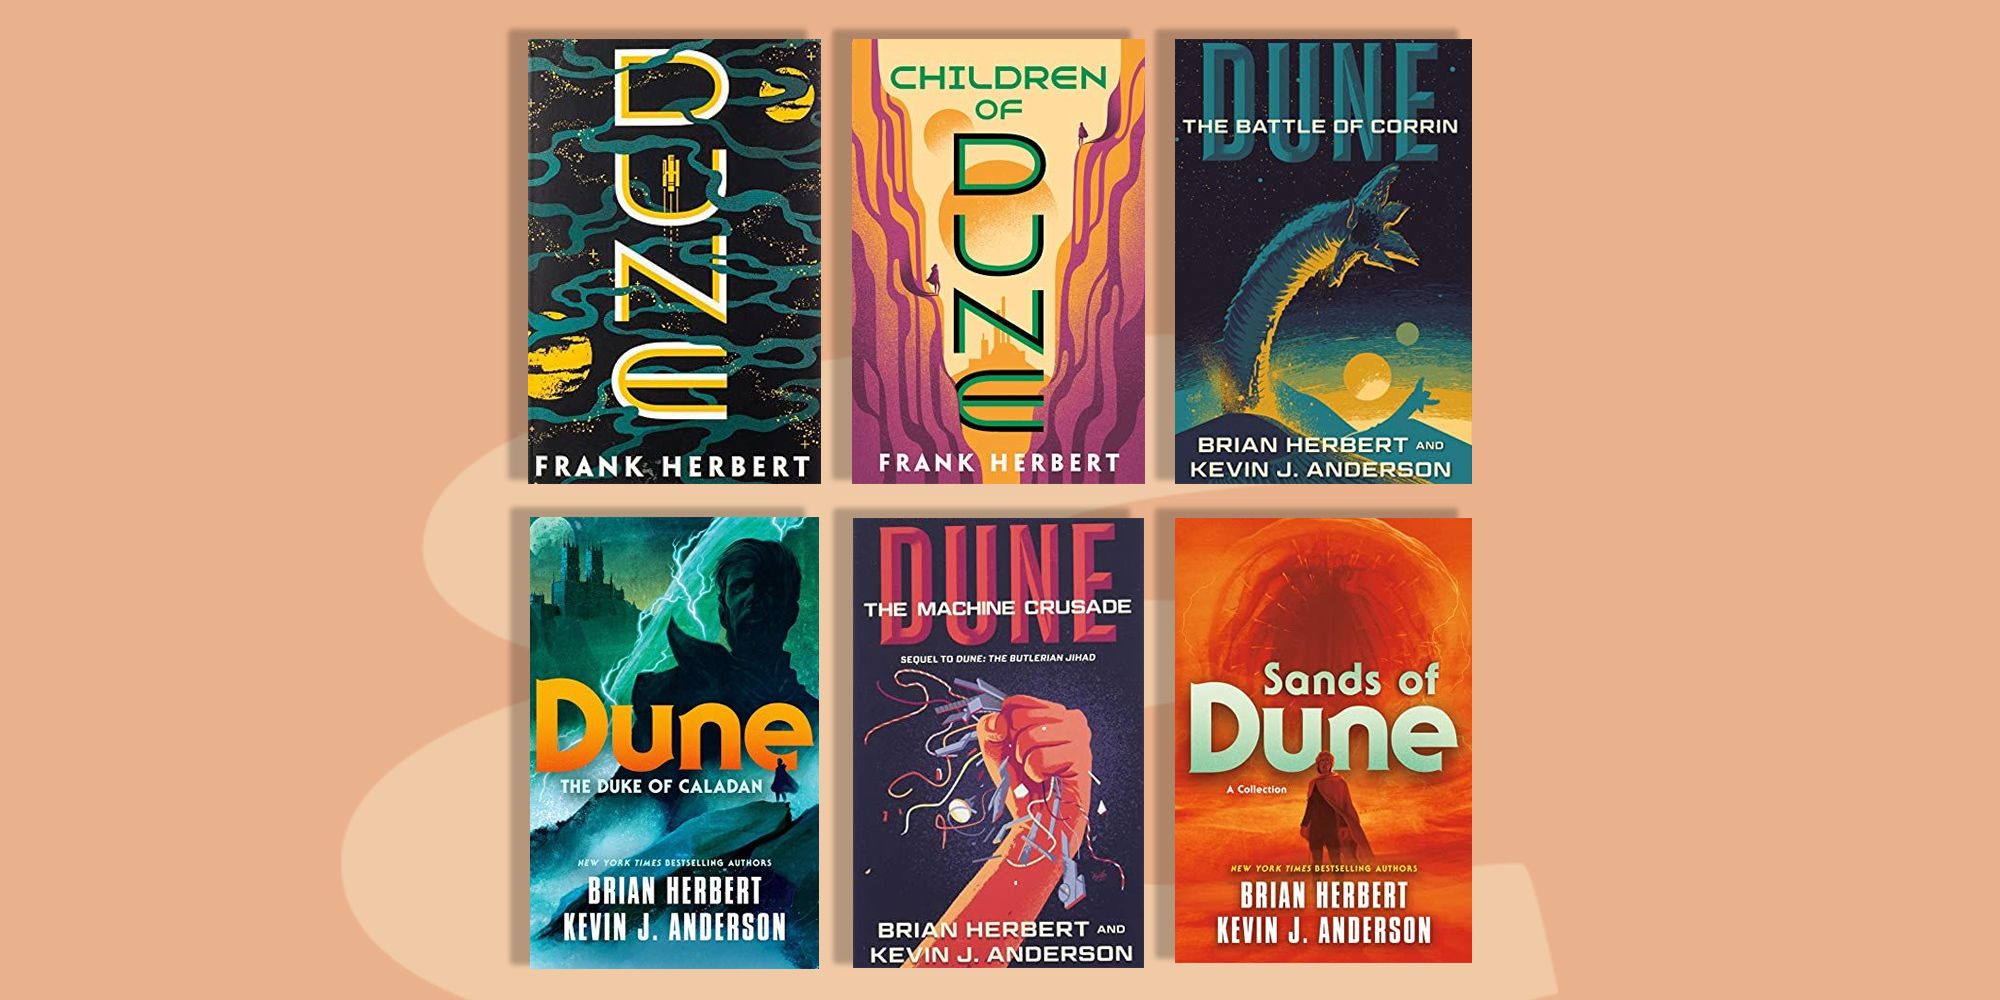 50 of the Best Science Fiction Books Ever Written